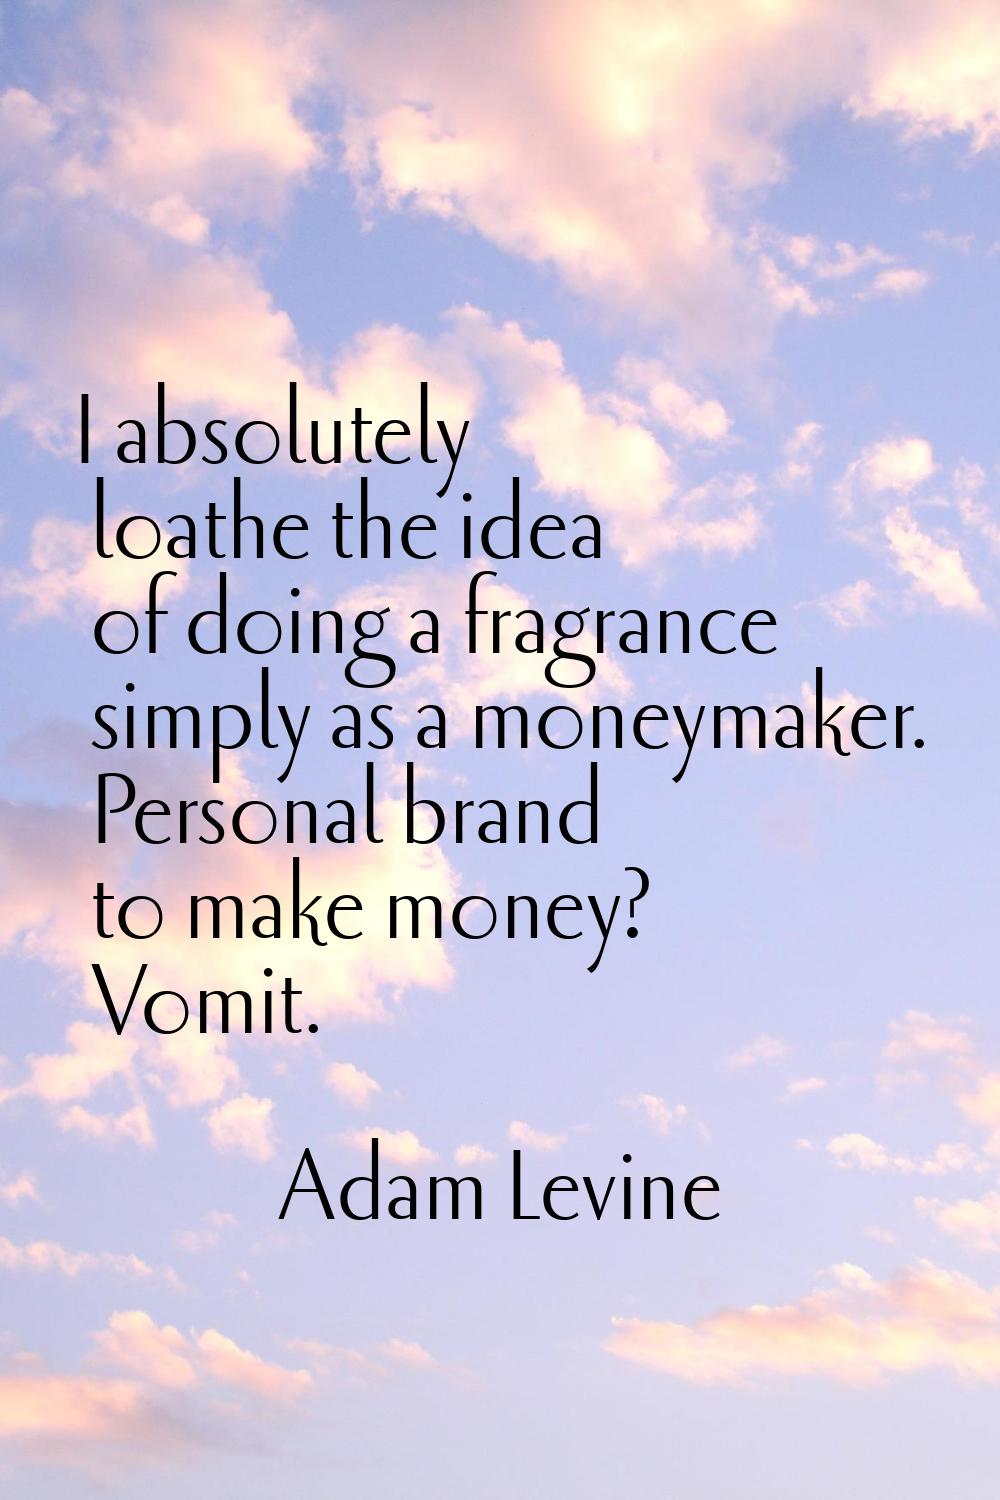 I absolutely loathe the idea of doing a fragrance simply as a moneymaker. Personal brand to make mo